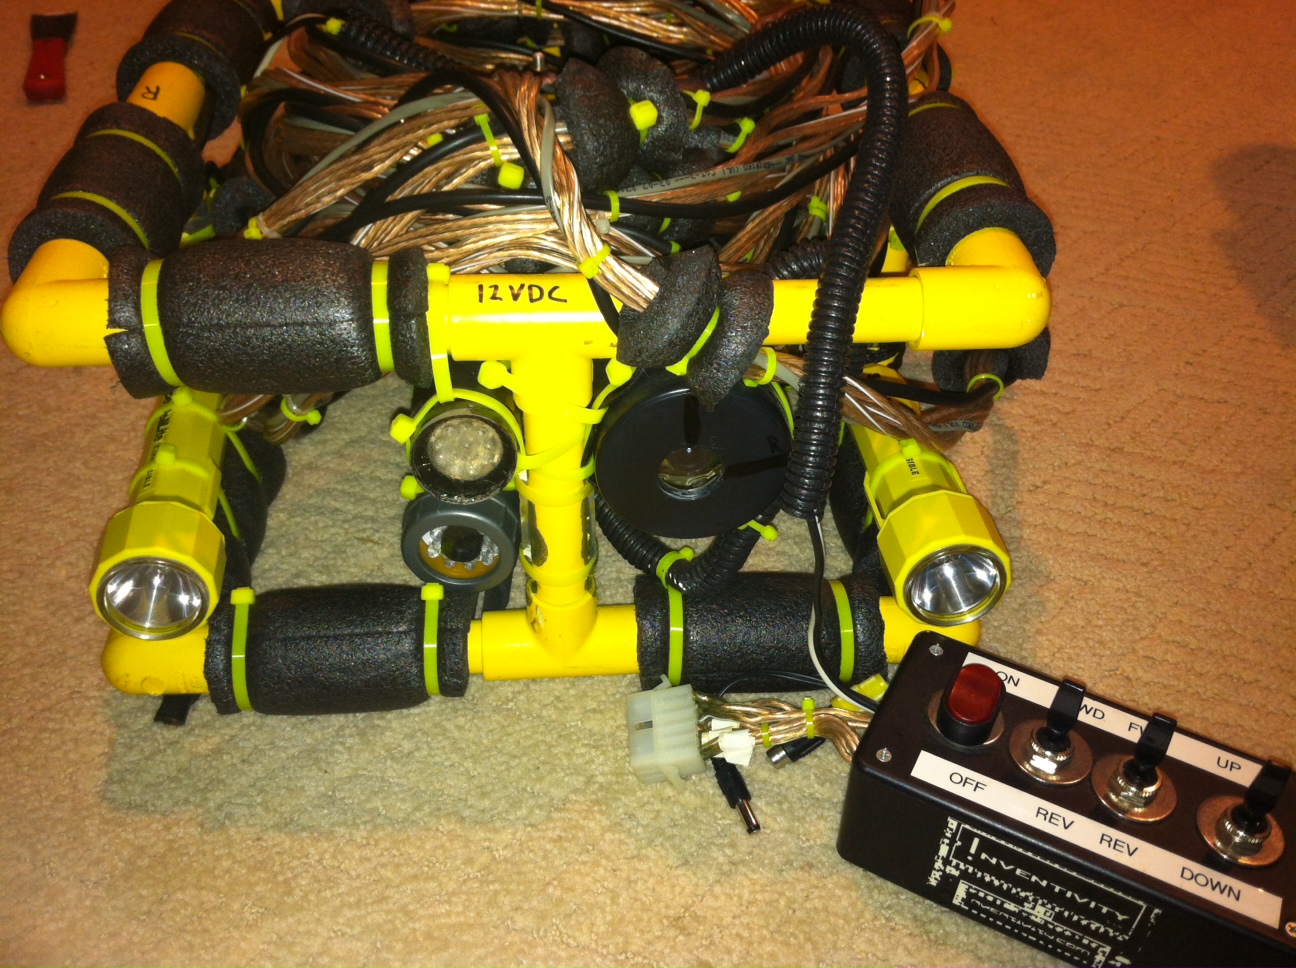 ROV after being: built, abused and stored for 9 years.